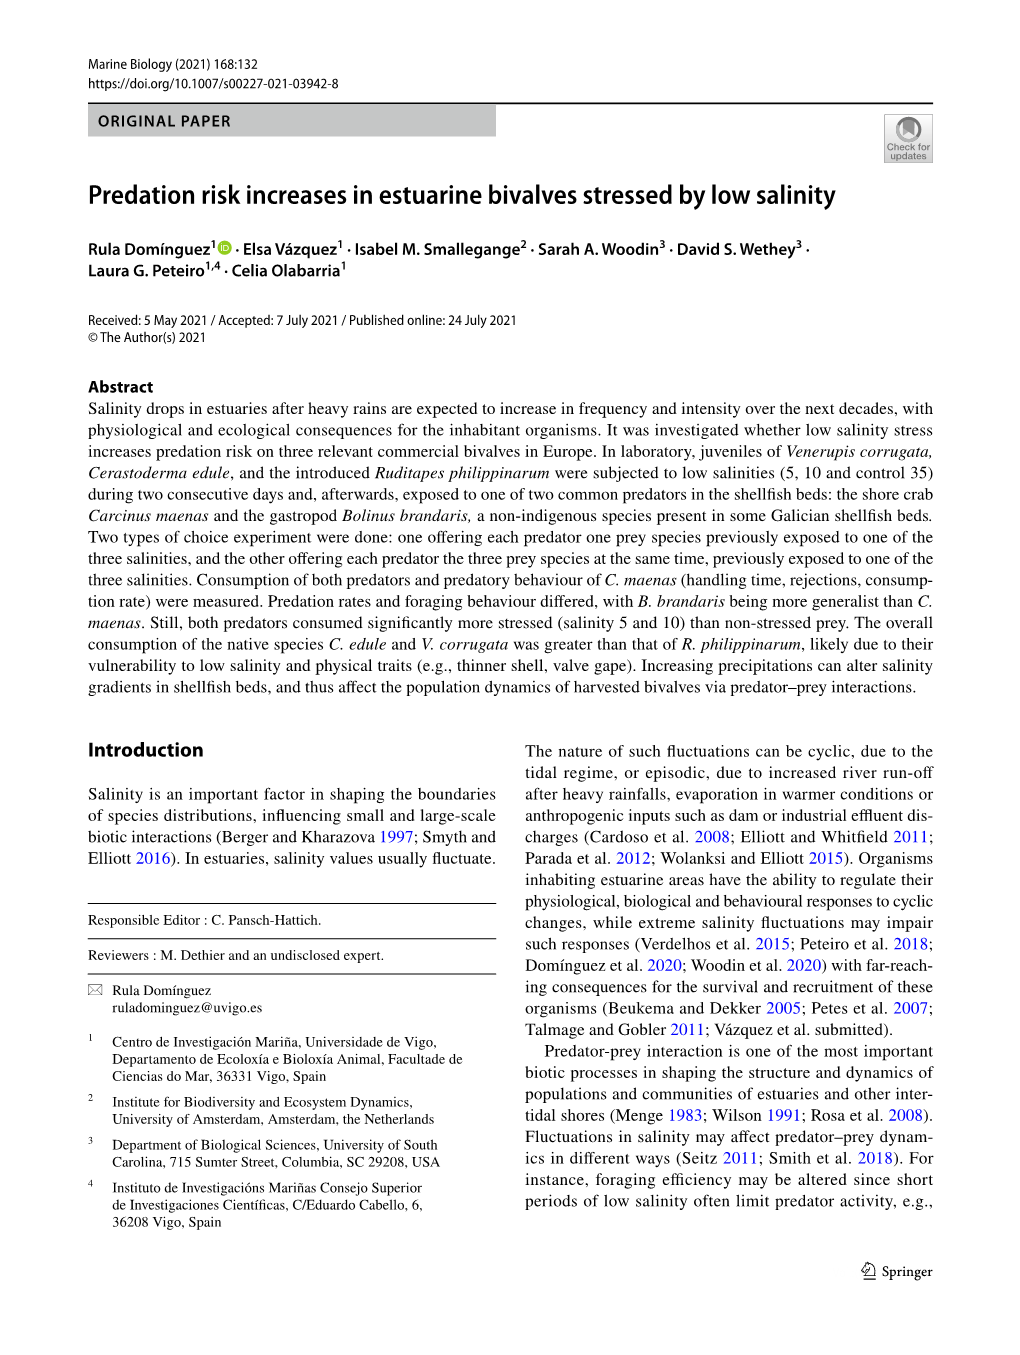 Predation Risk Increases in Estuarine Bivalves Stressed by Low Salinity